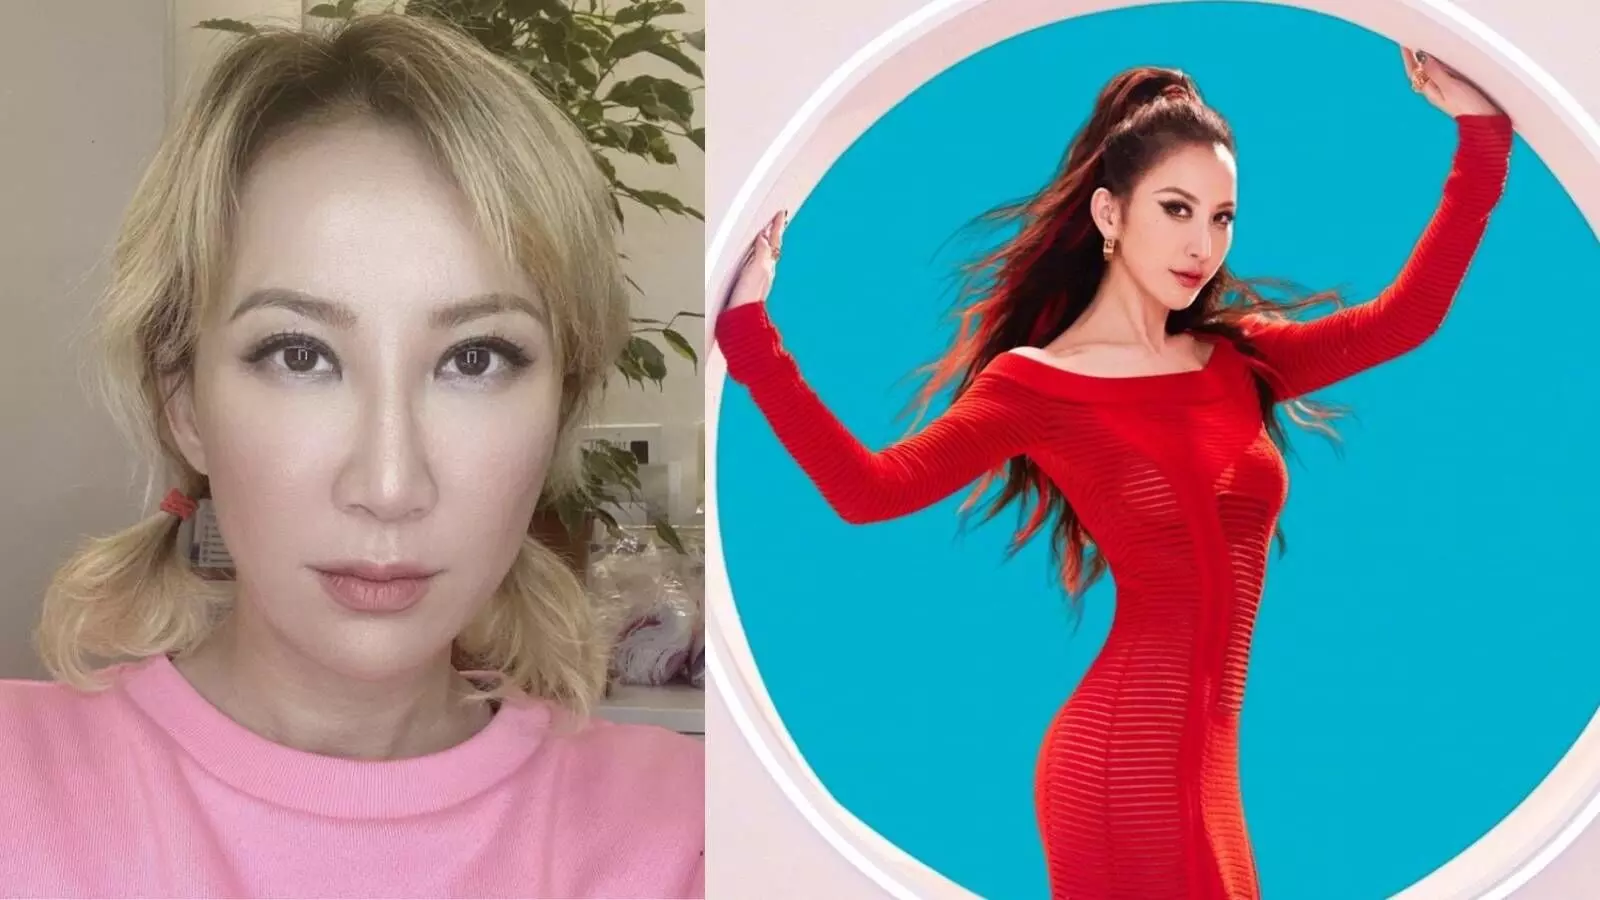 Disney star, singer CoCo Lee dies at 48 after suicide attempt